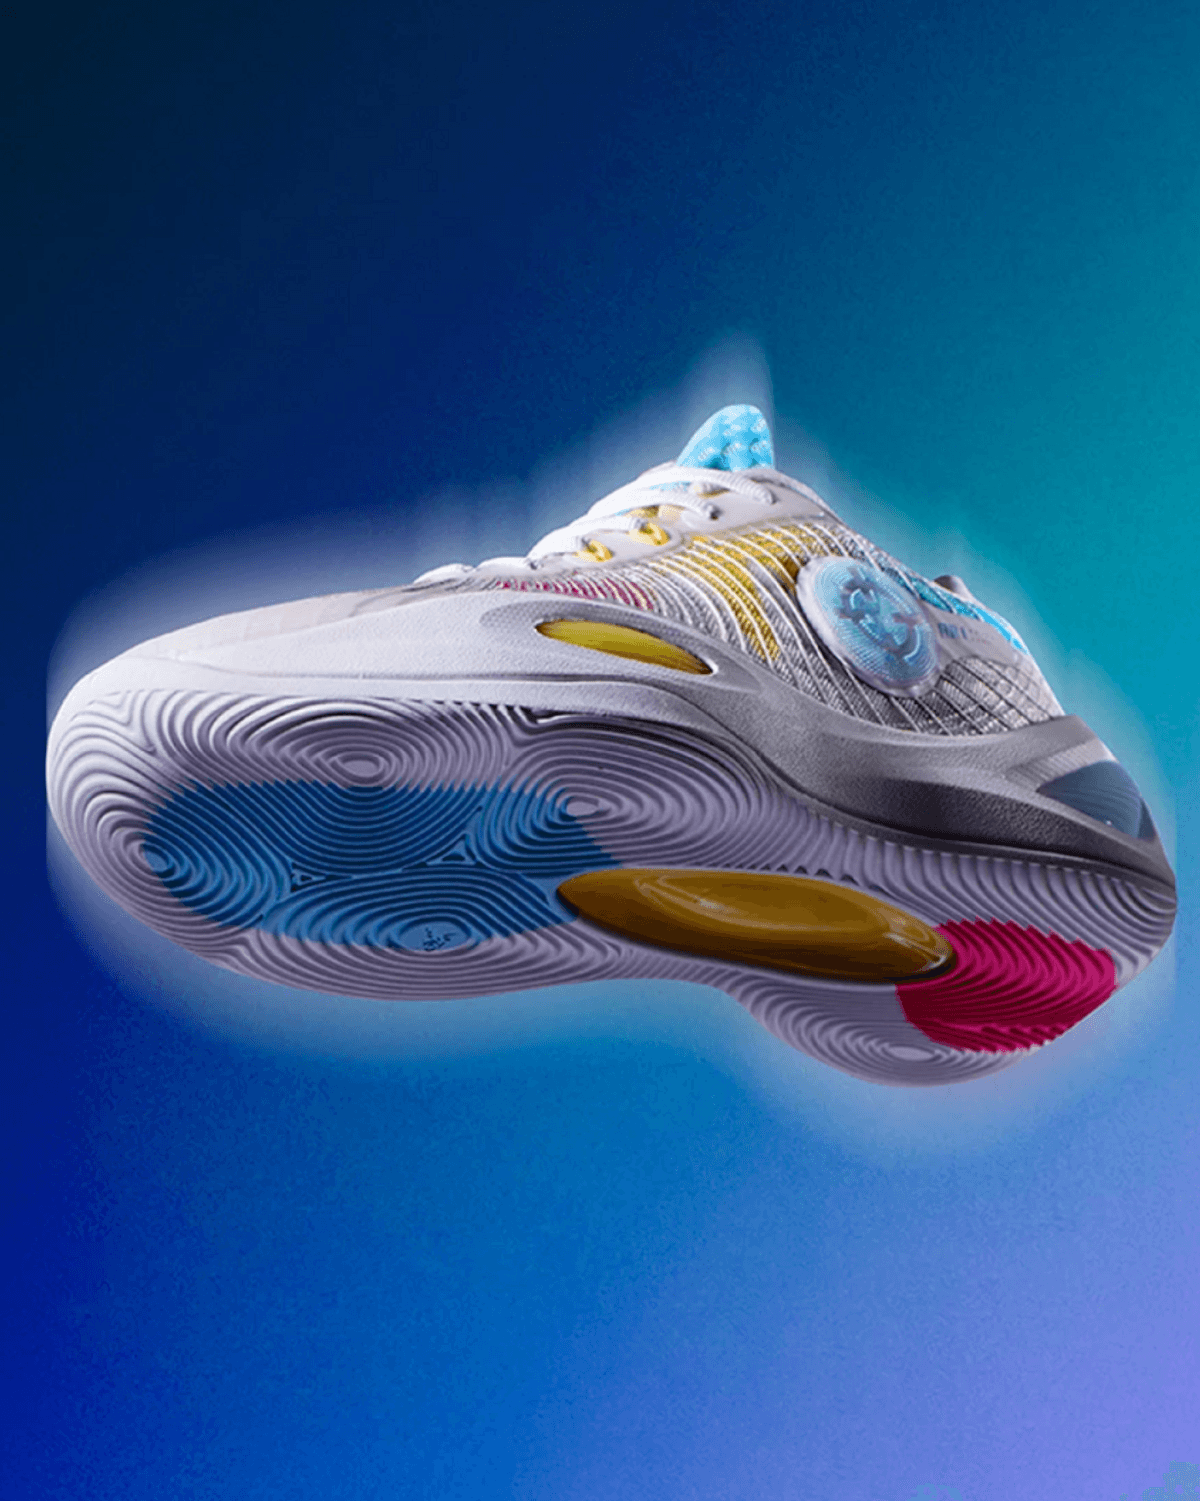 The Austin Reaves’ Rigorer AR1 Ice Cream Hits The Courts August 11th